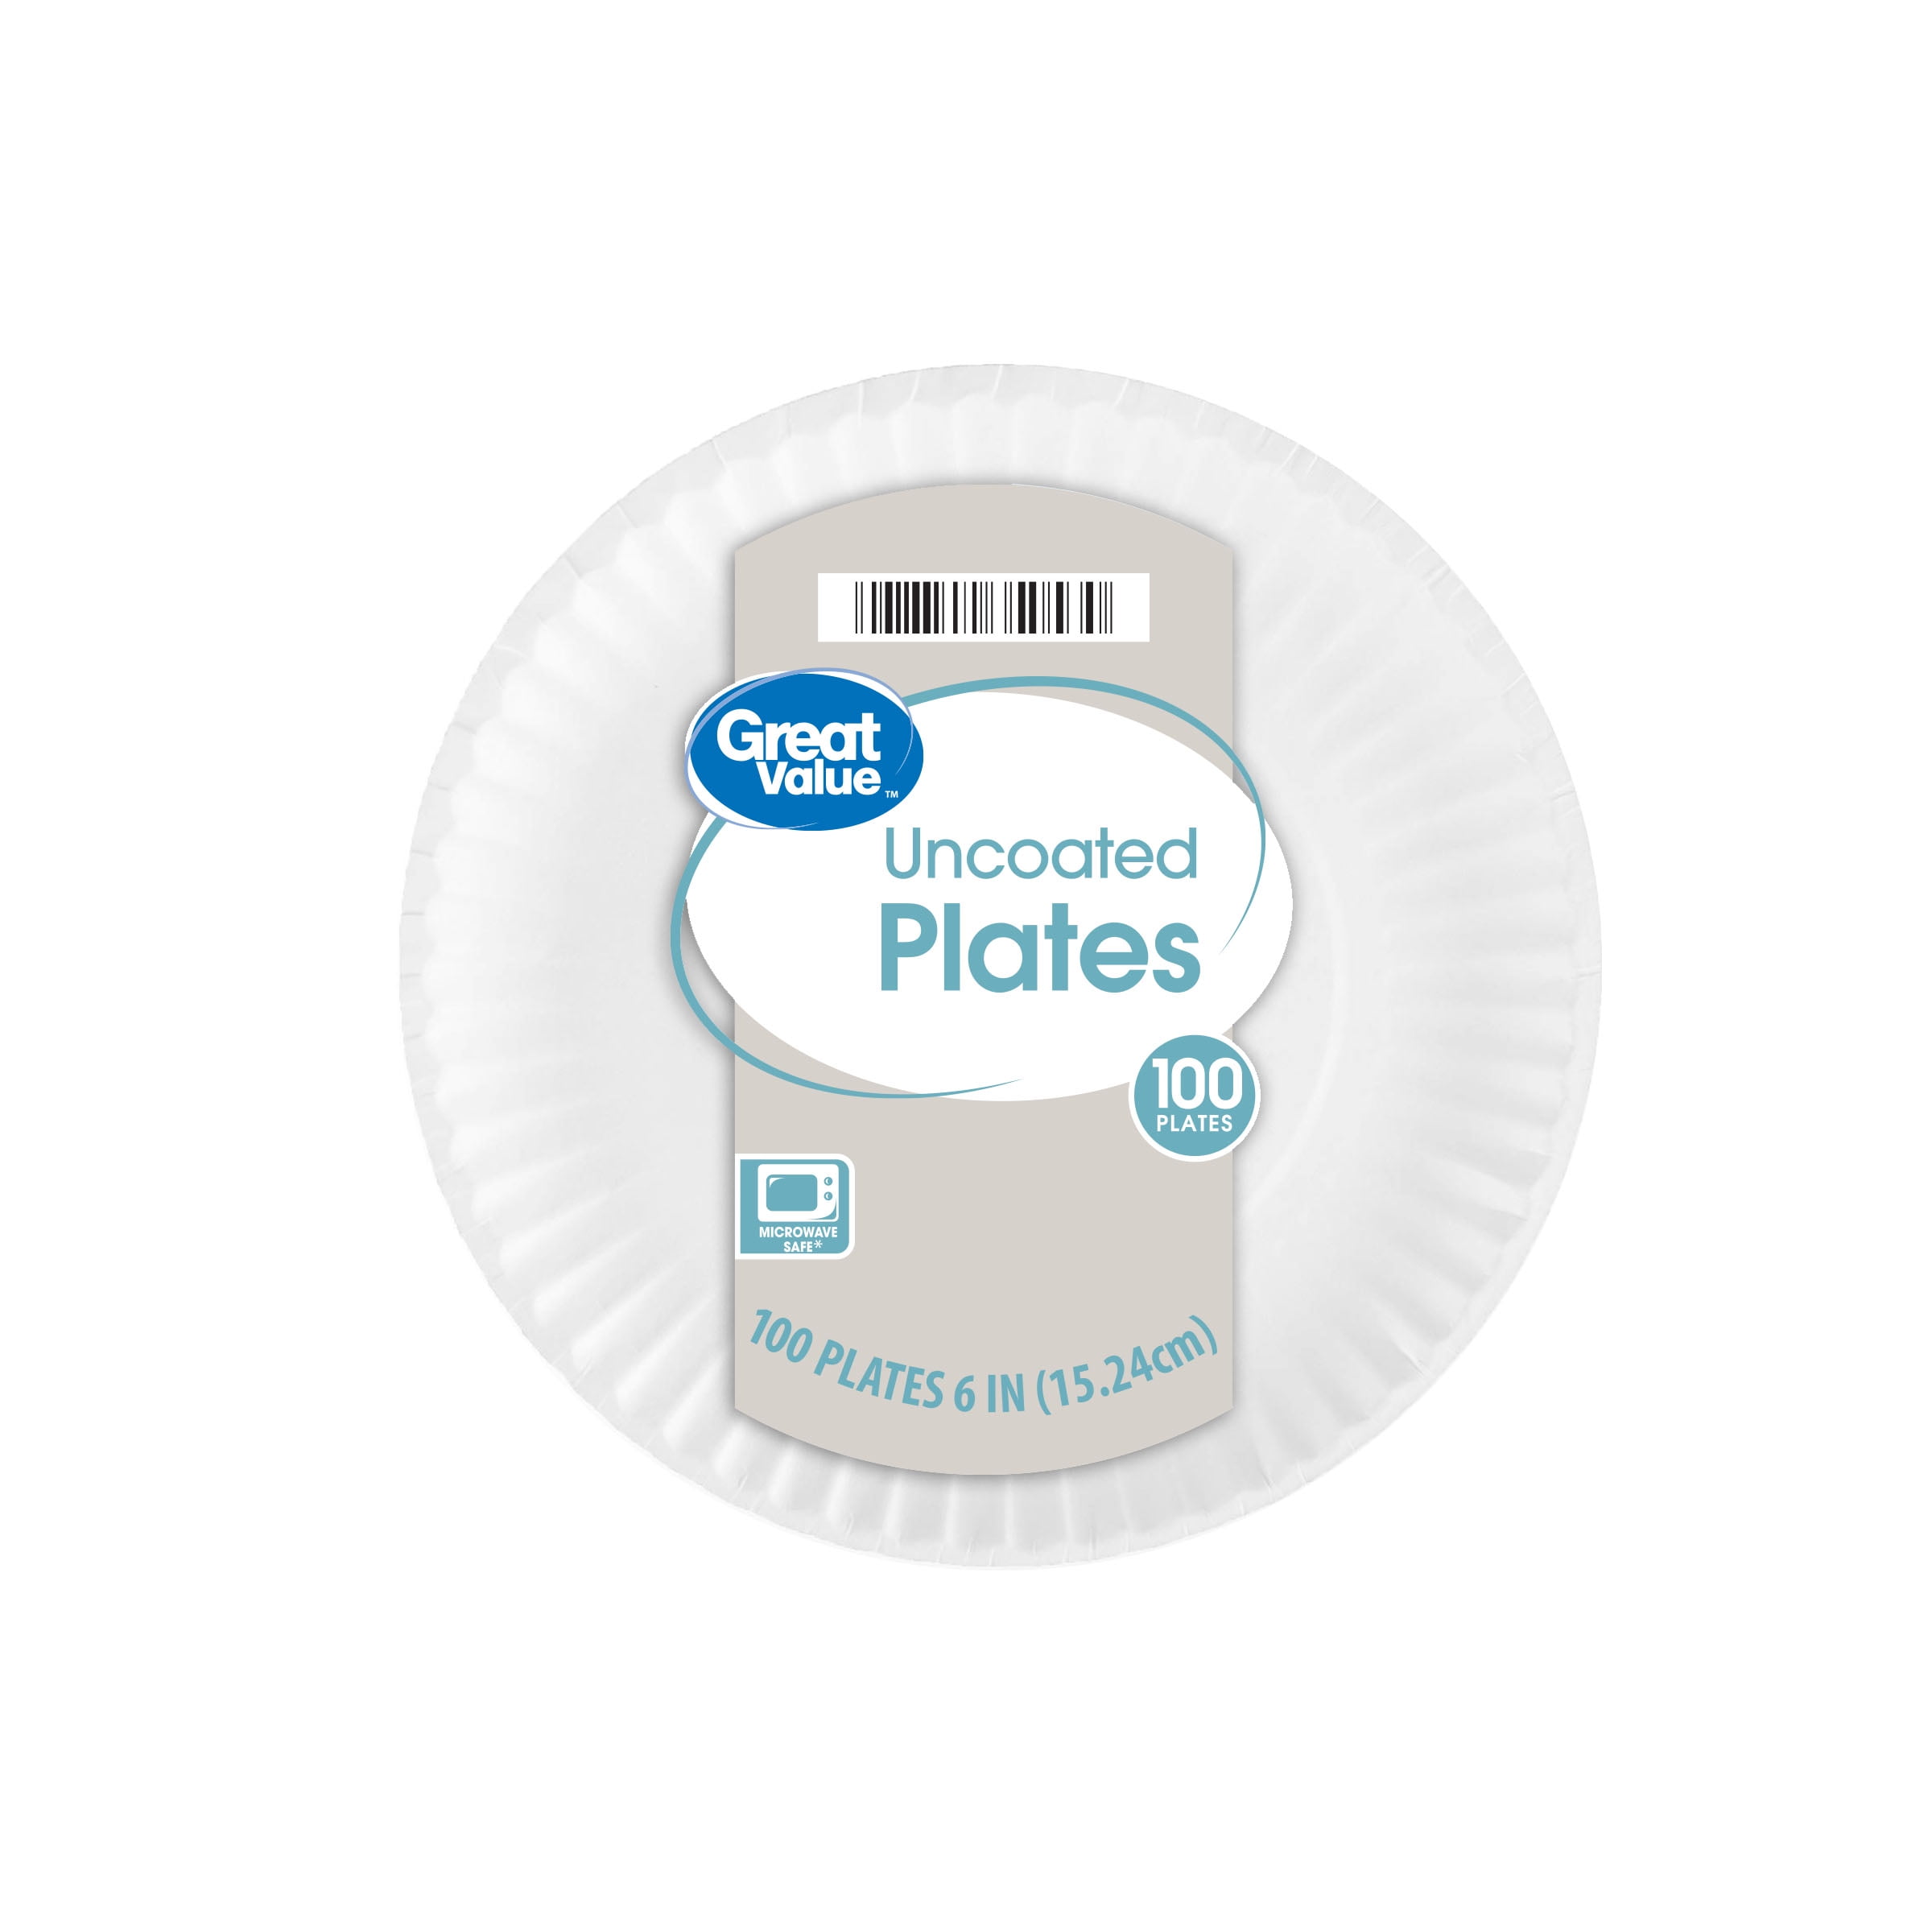 Focusline 6 inch Paper Plates 1000 Count, White Paper Plates Uncoated, Everyday Disposable Dessert Plates 6 Small Paper Plates Bulk 1000 Count